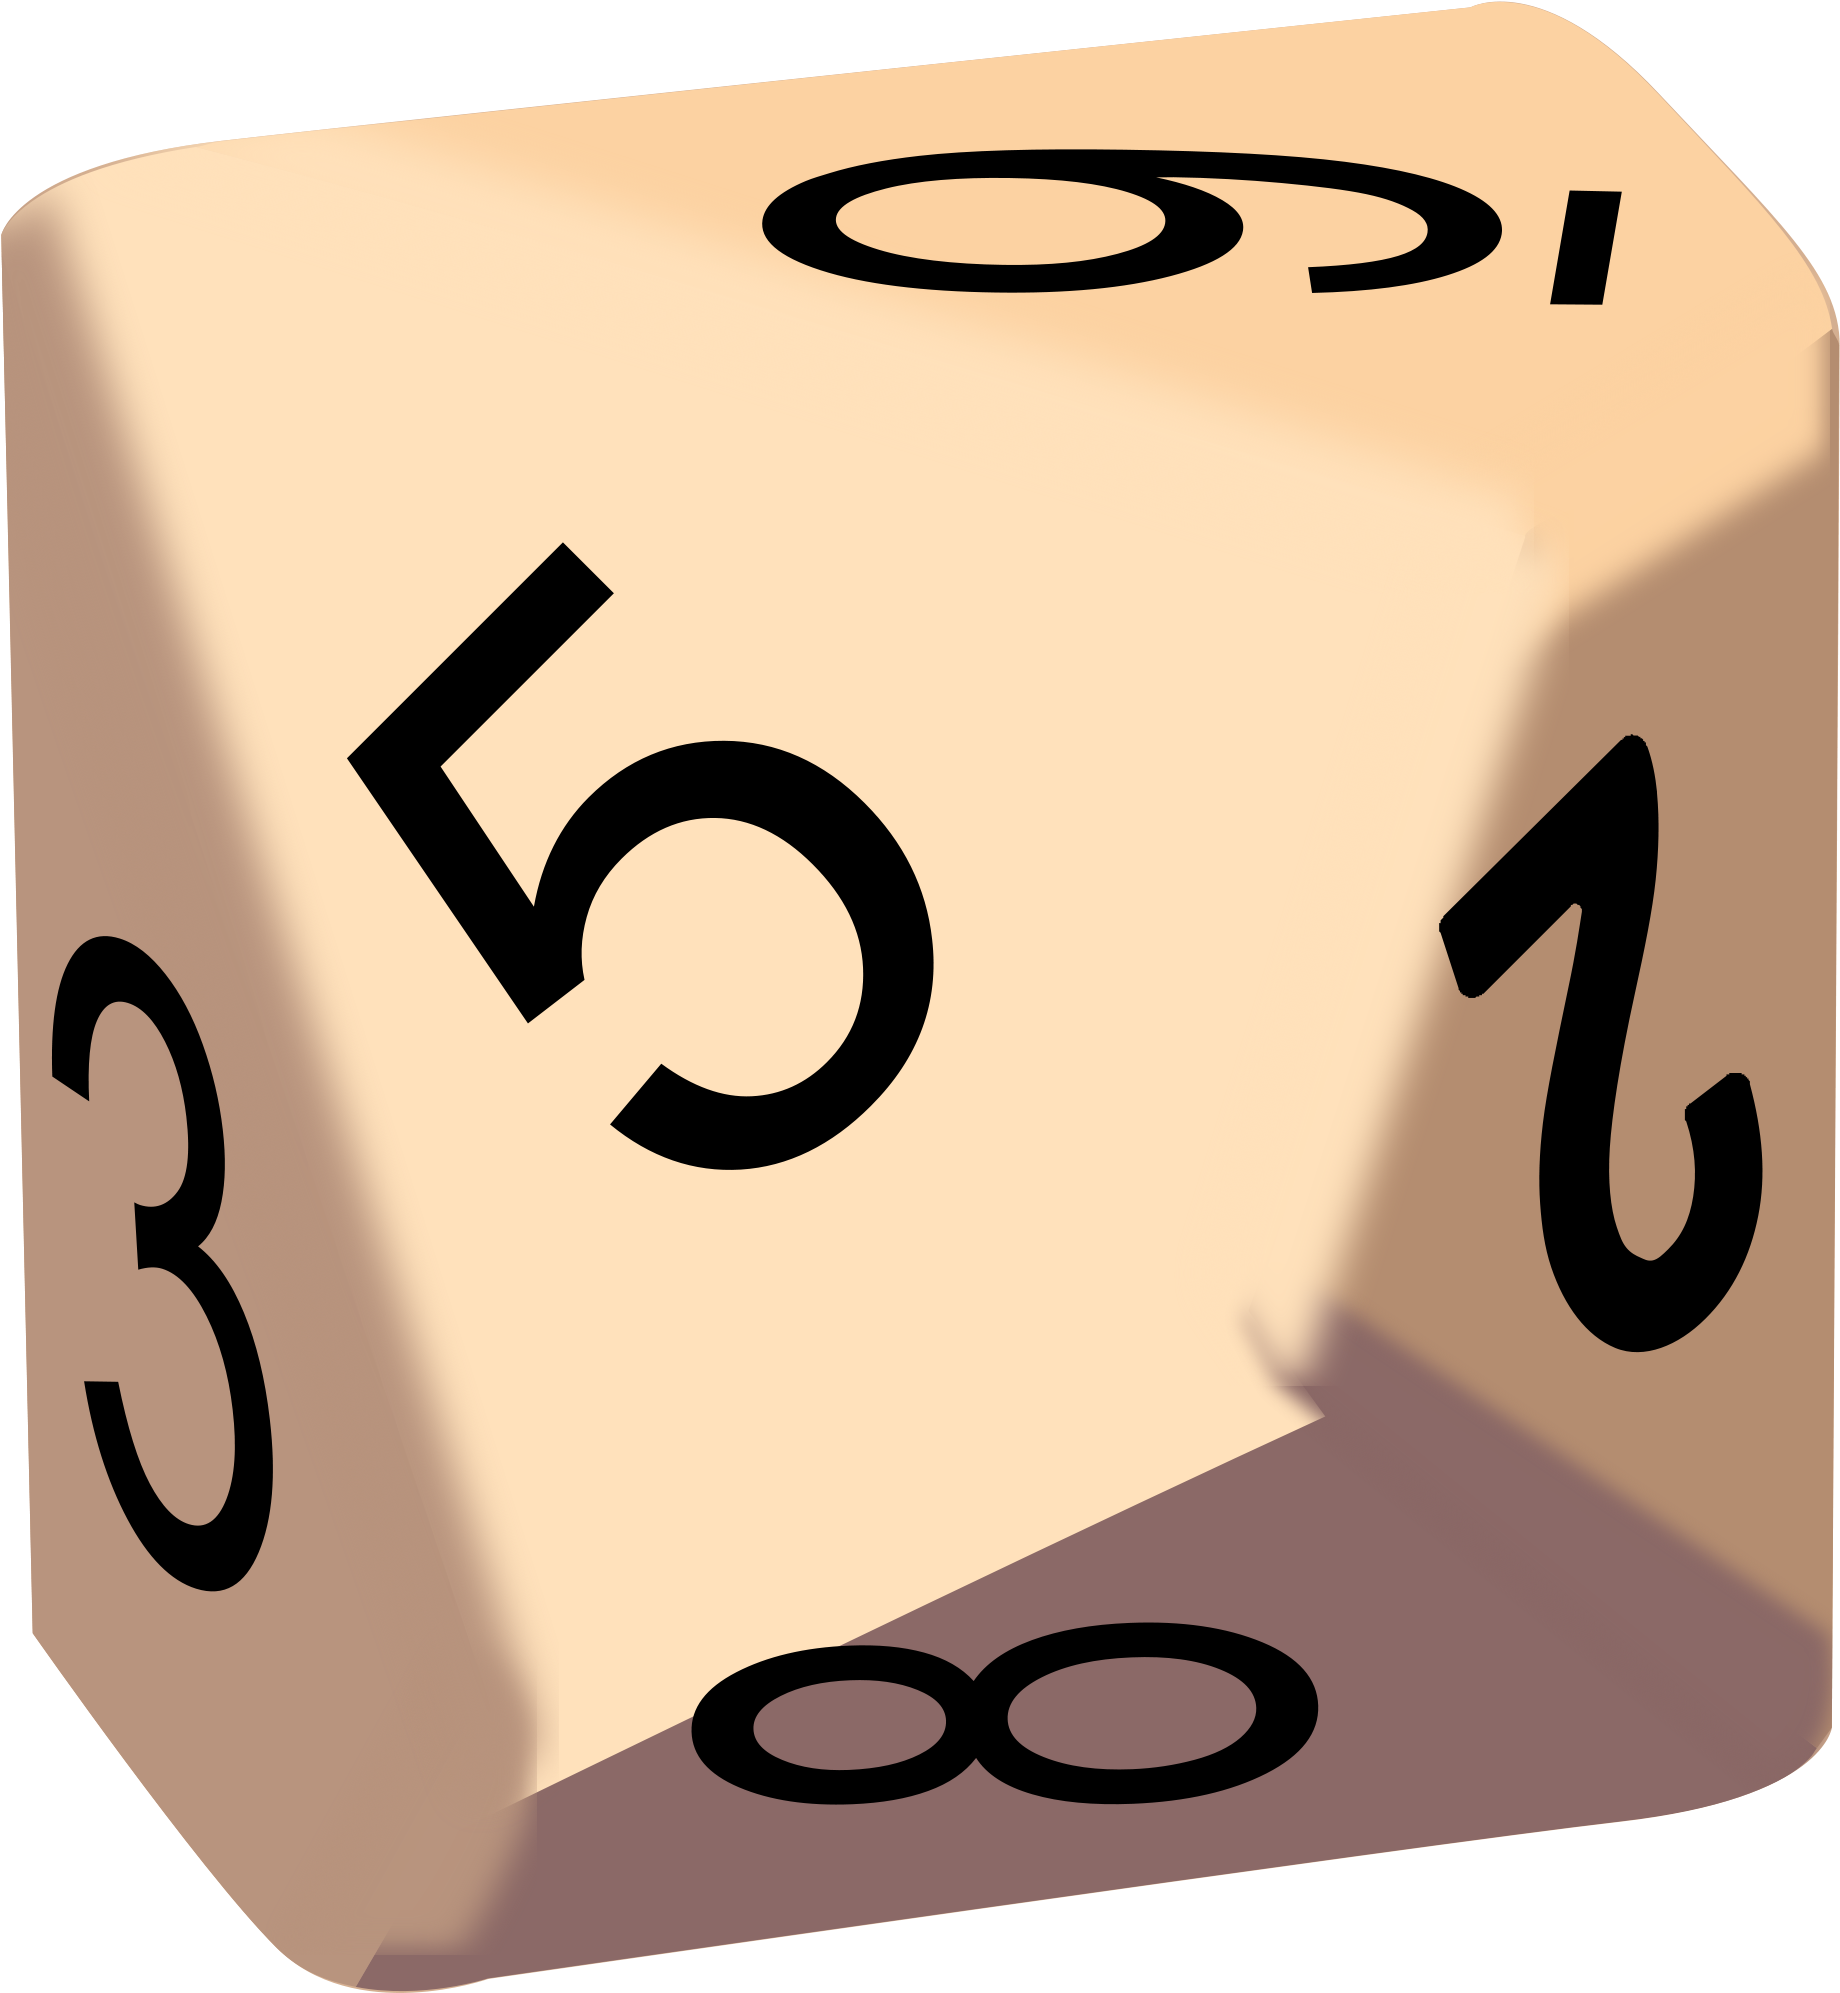 Who Moves First - 10 Sided Interactive Dice (2000x2044)